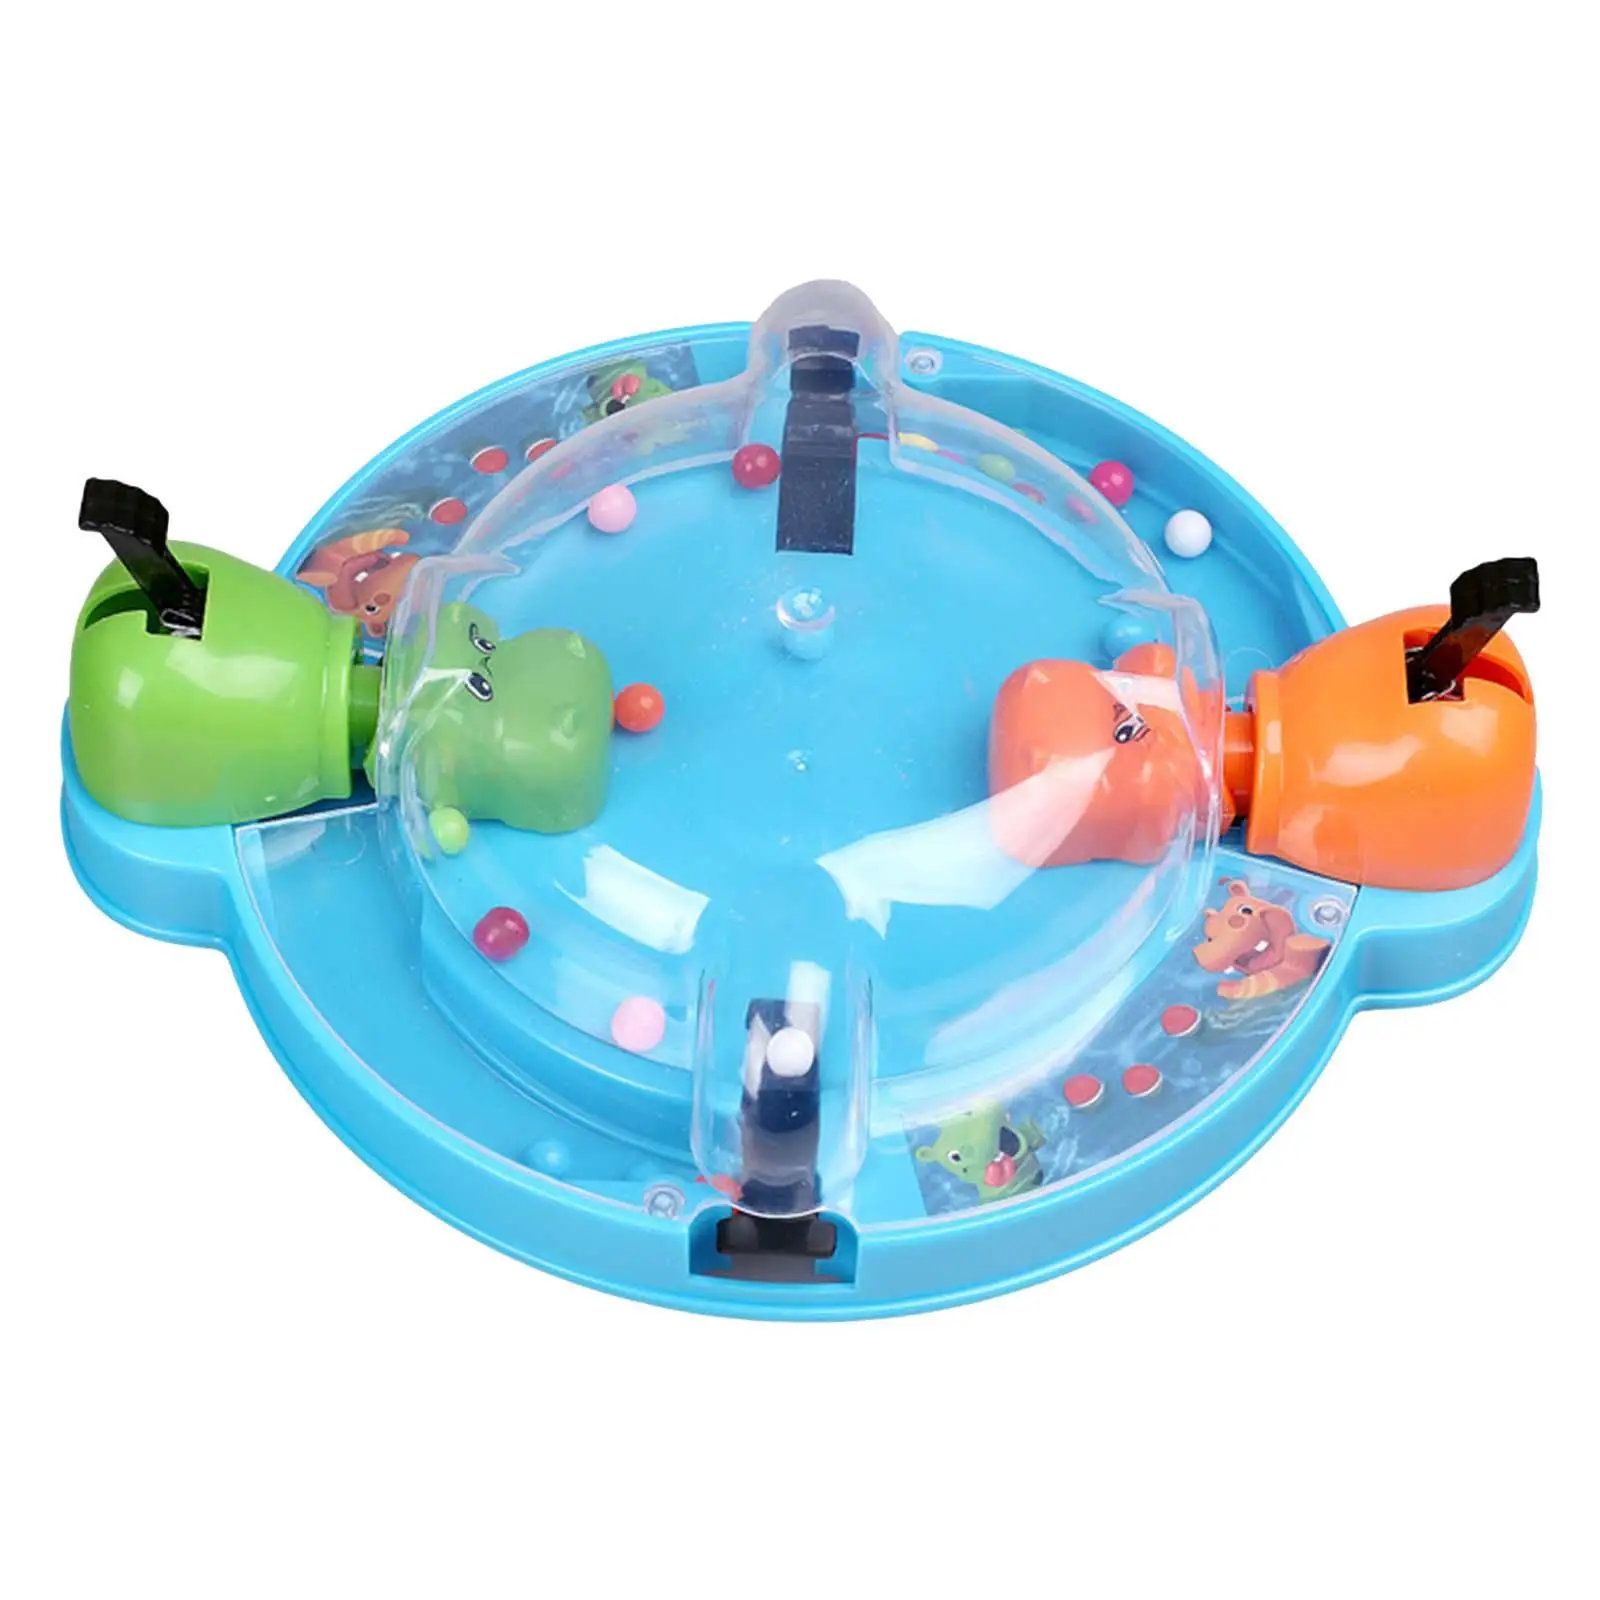 

Board Game Educational Tabletop Game Hippos grab and game Hippo Bead Match for Activity Leisure Birthday Imagination Gifts